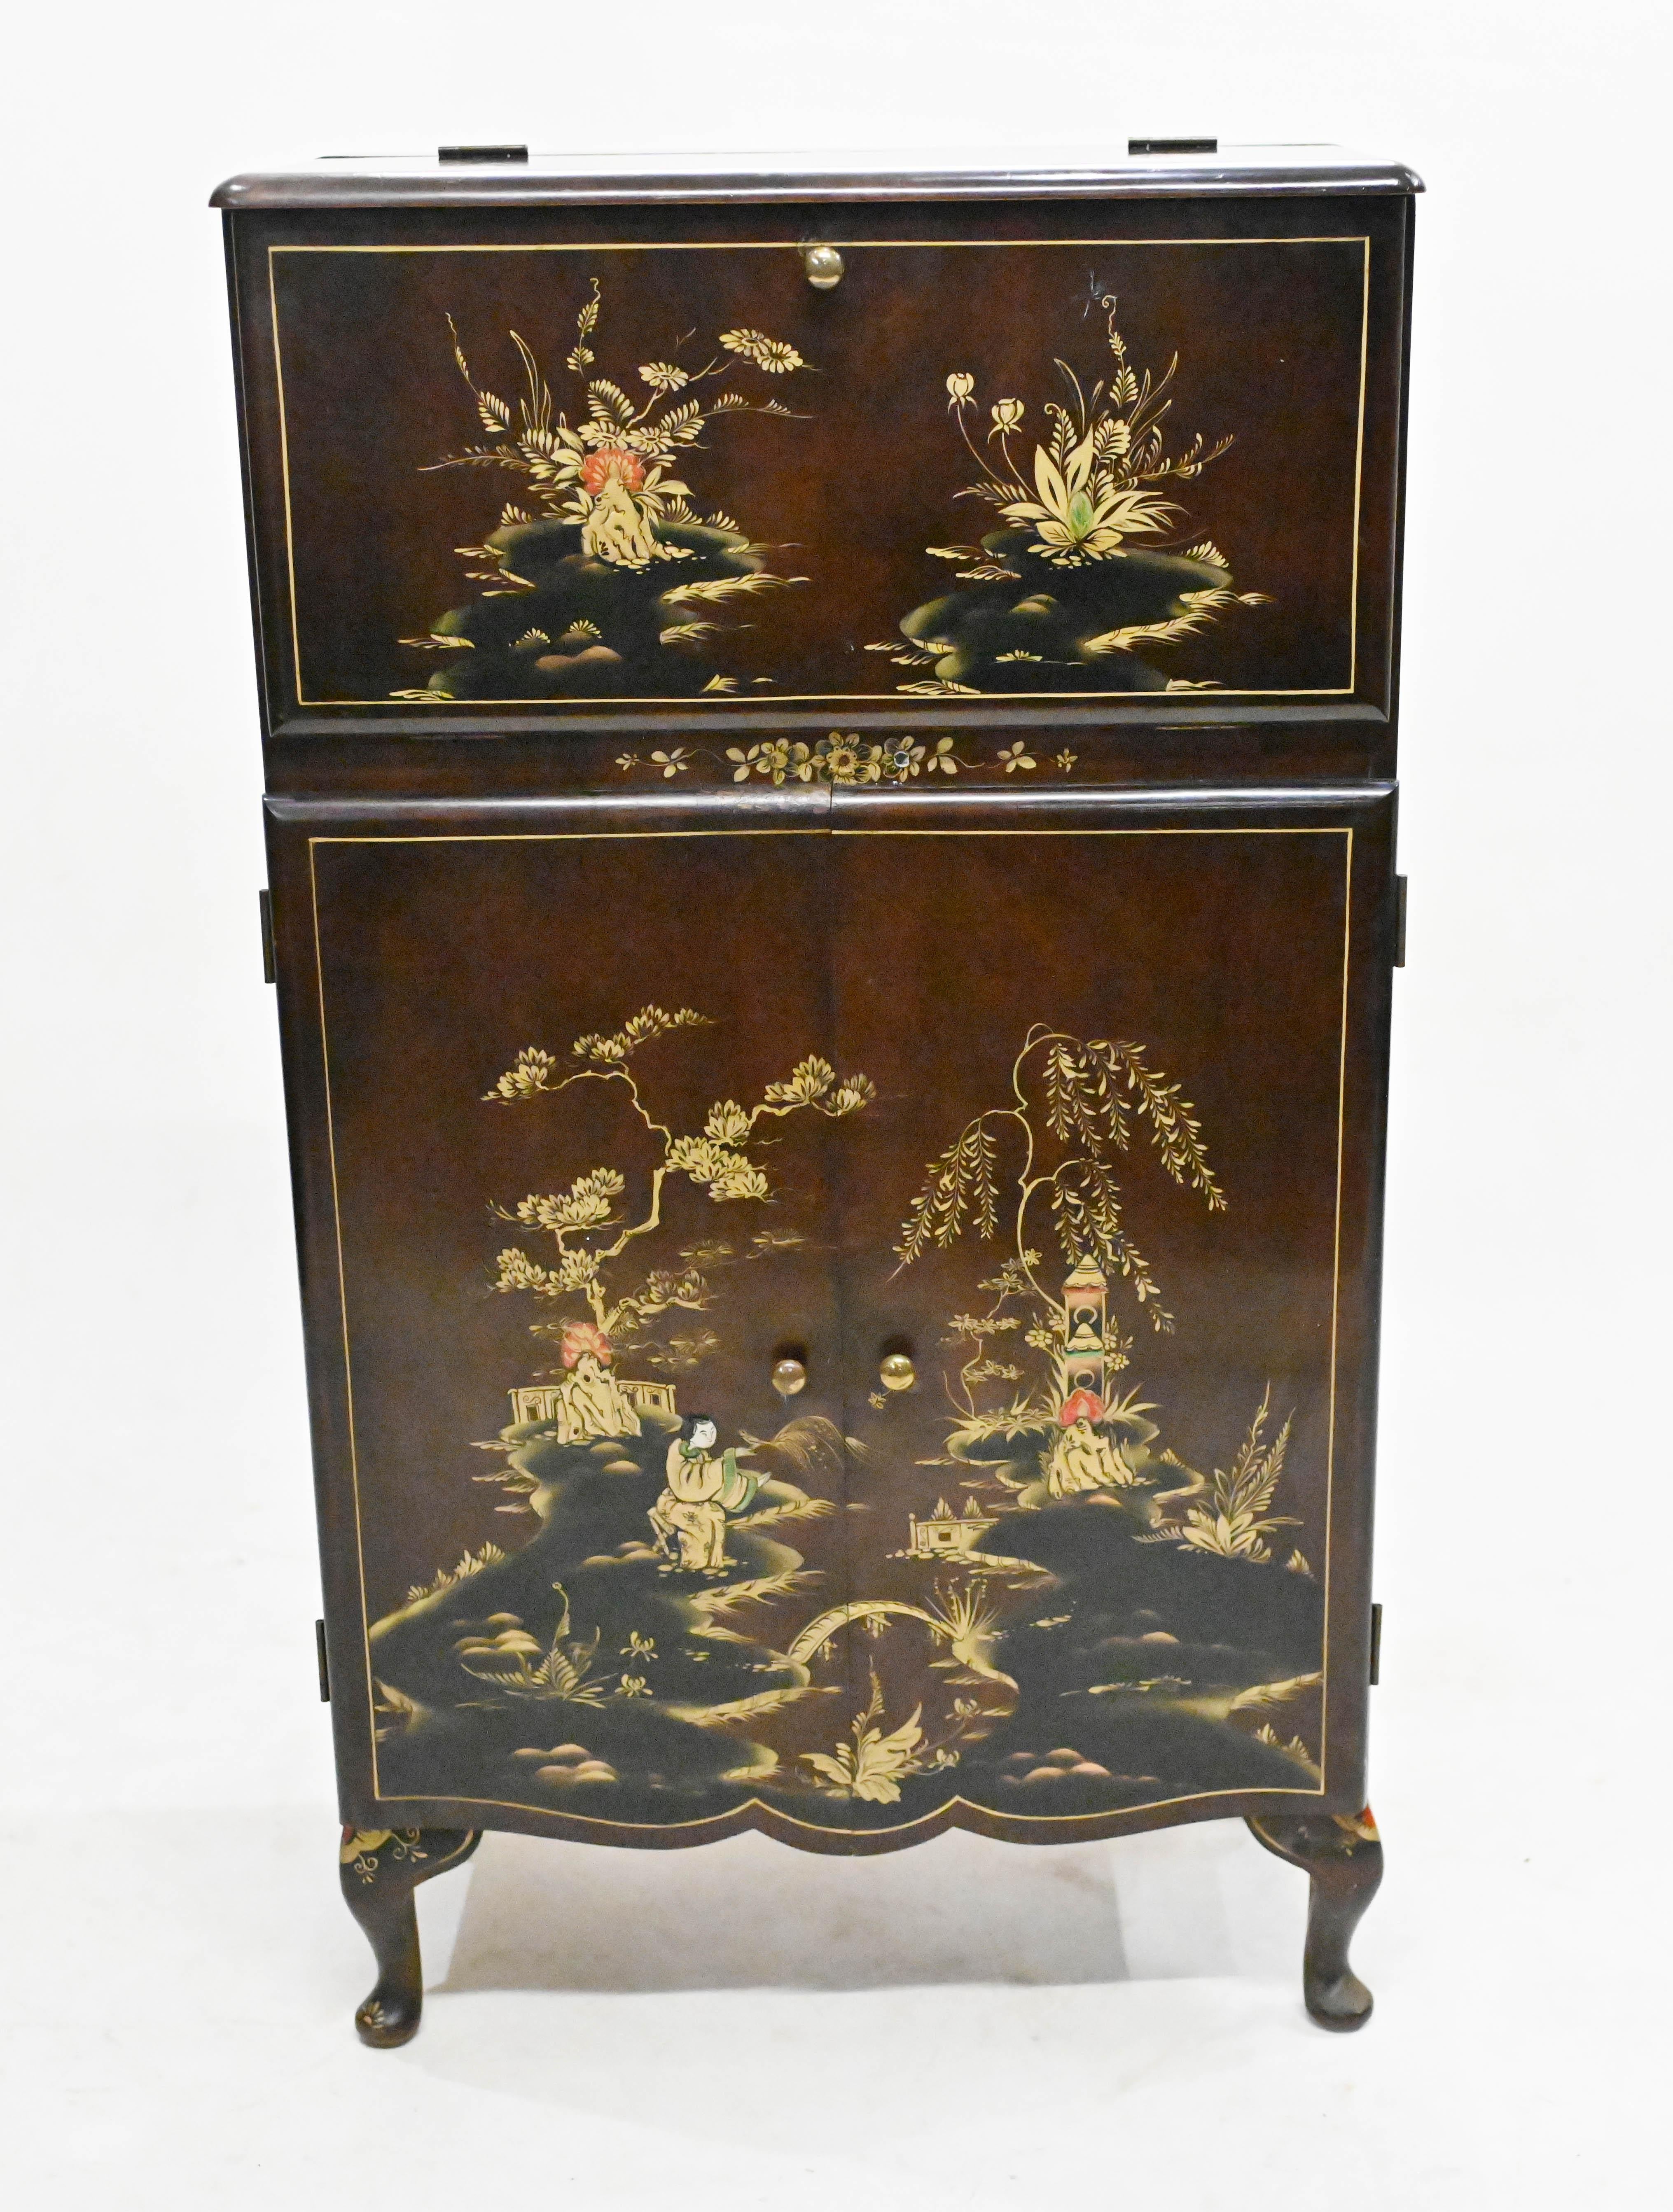 Collectable vintage art deco cocktail cabinet with lacquered finish
Features intricate Chinoiserie work showing Chinese figures, pagodas and foliage
Great interiors look very Shanghai surprise
Circa 1930
Opens out to reveal drinks serving area with